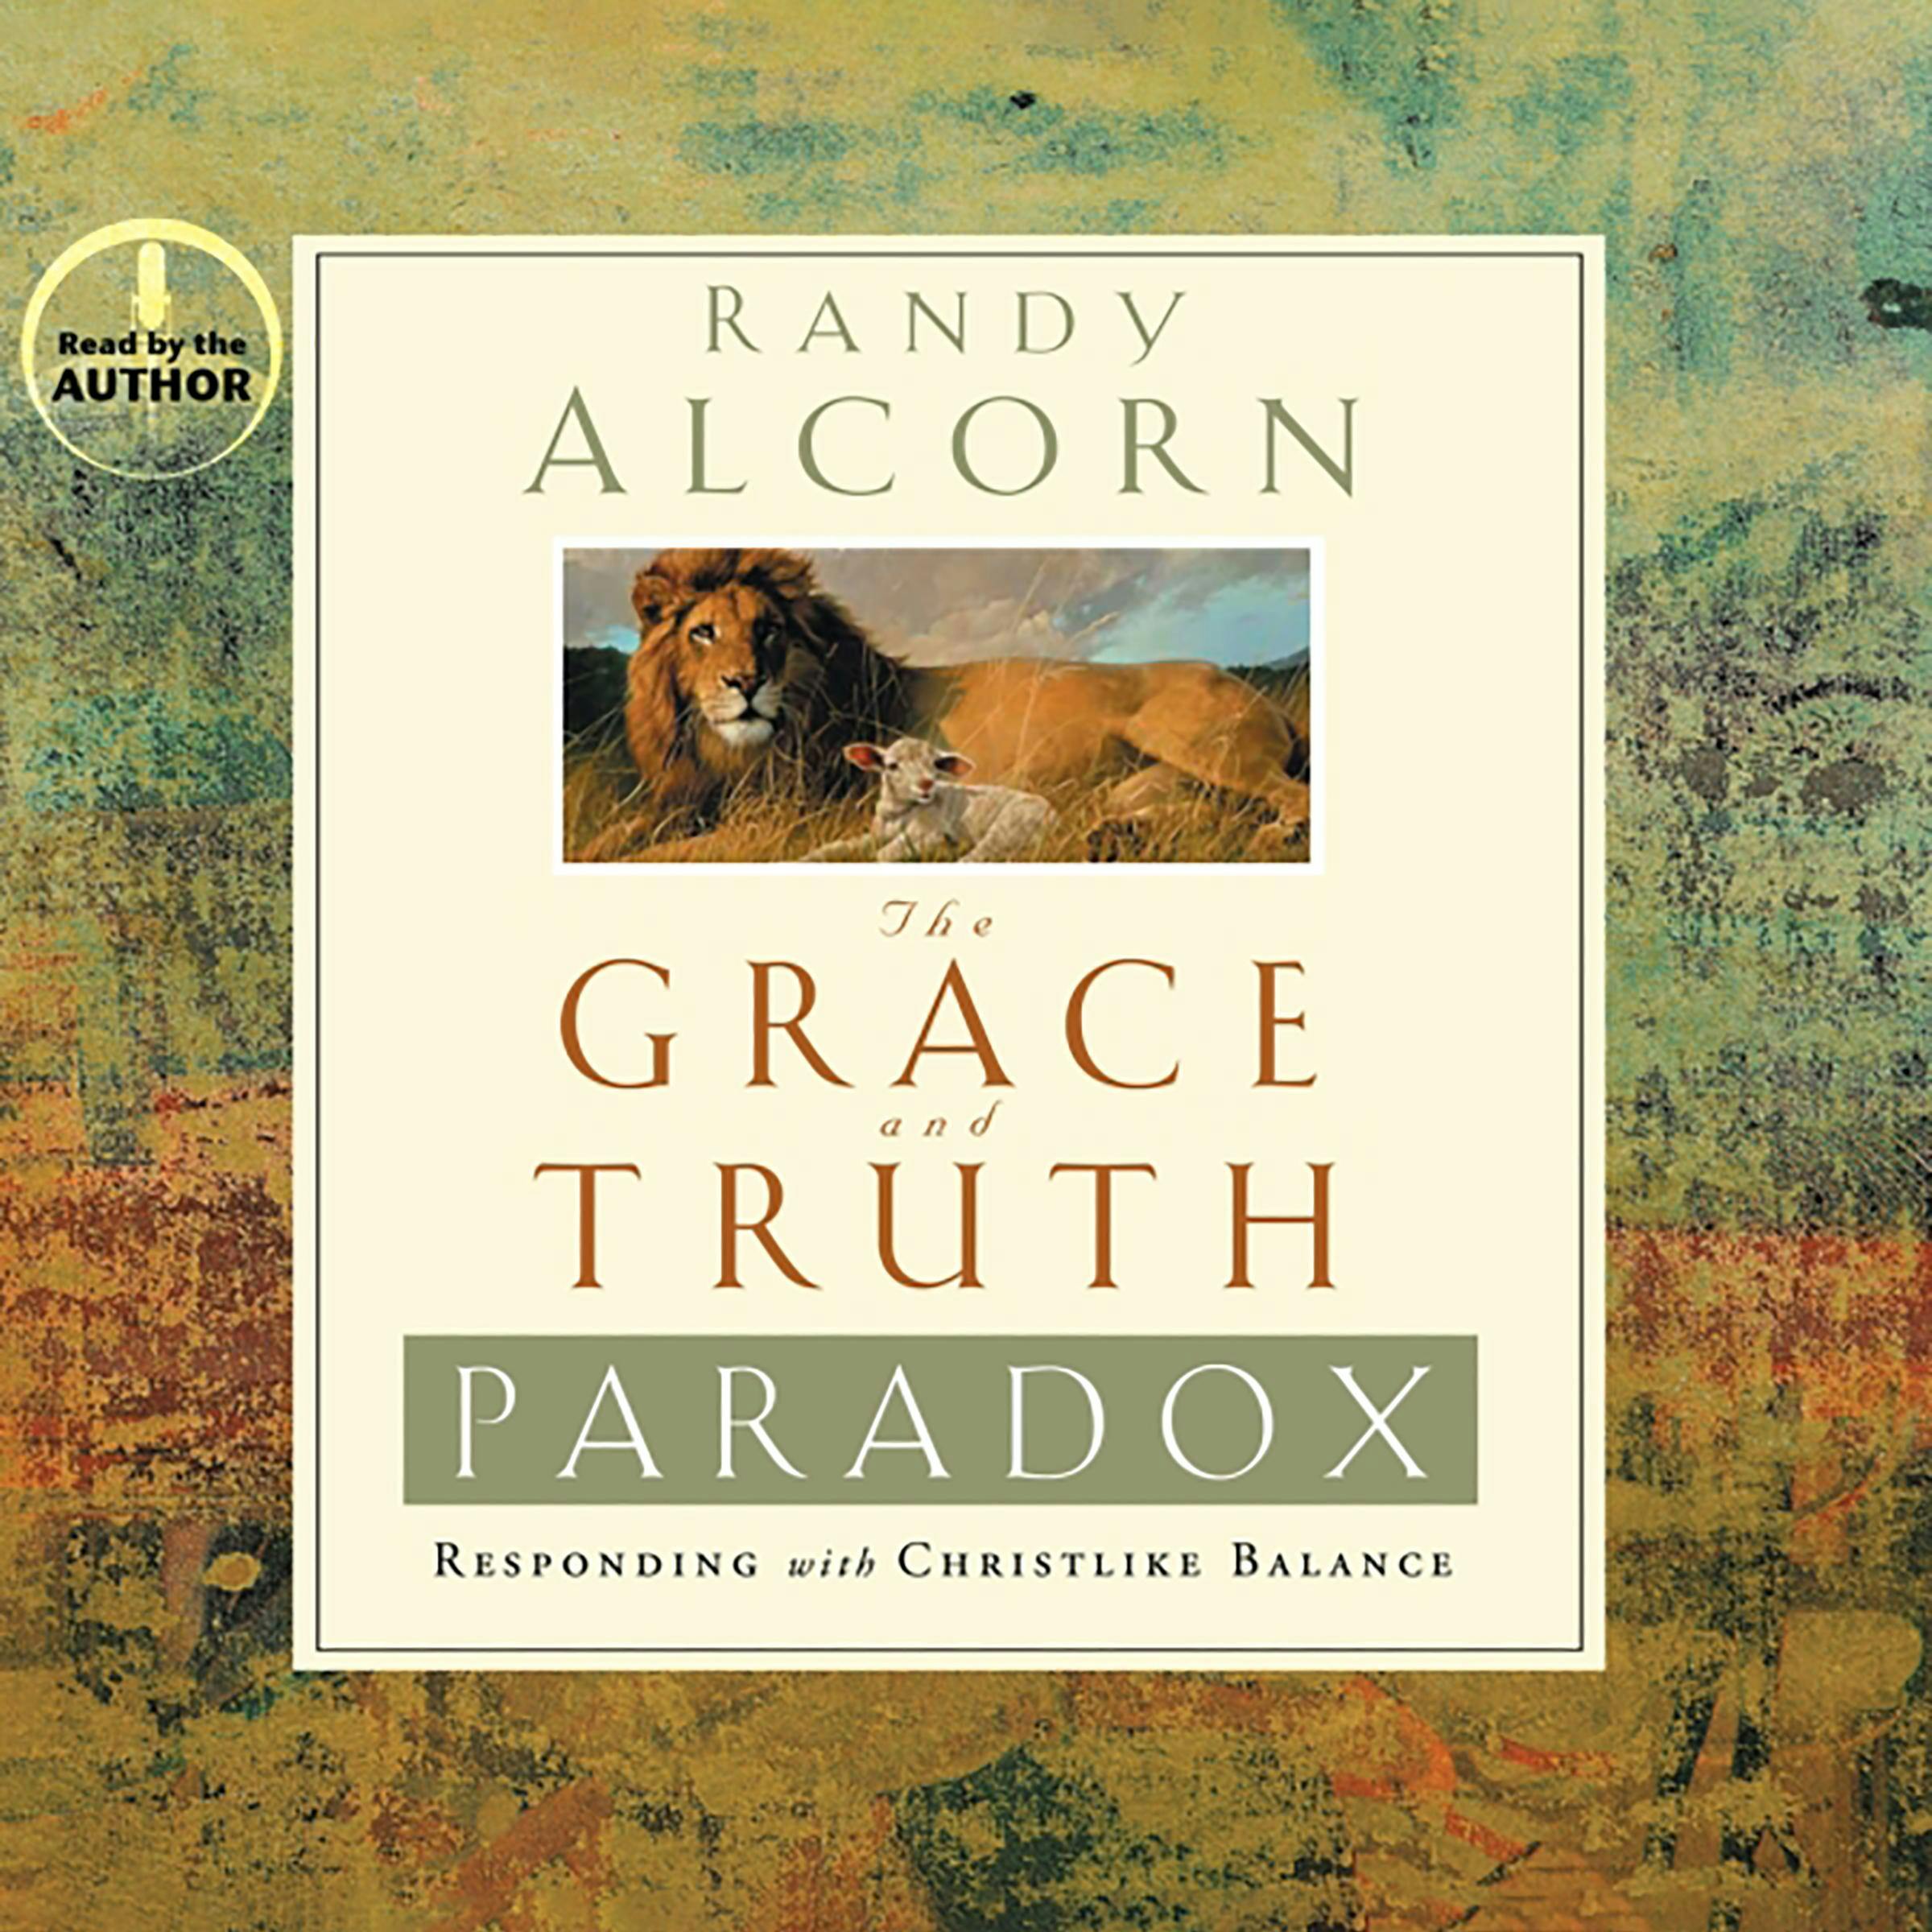 The Grace and Truth Paradox: Responding With Christlike Balance - Randy Alcorn